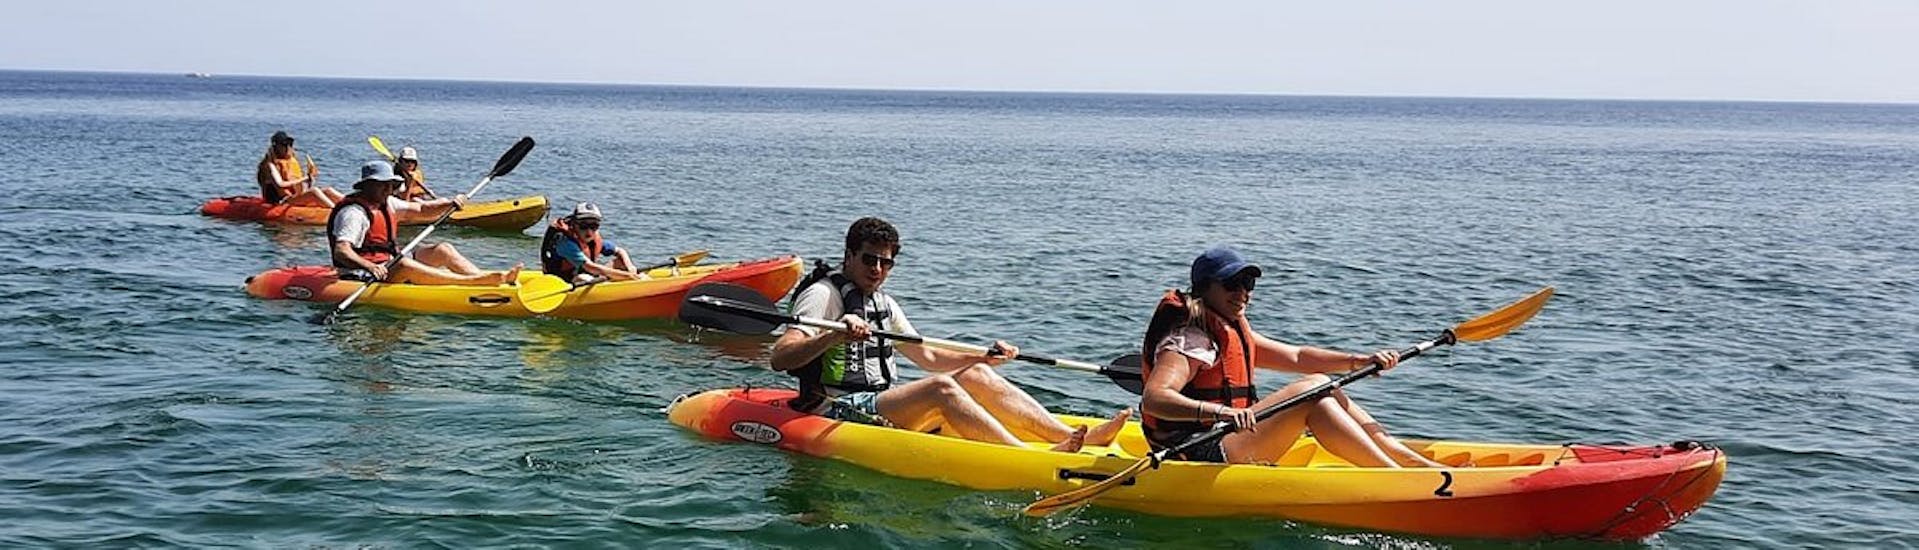 3 kayaks with 2 people per kayak relaxing on the water during the Kayak Tour in Salema through Caves from Salema Tours.